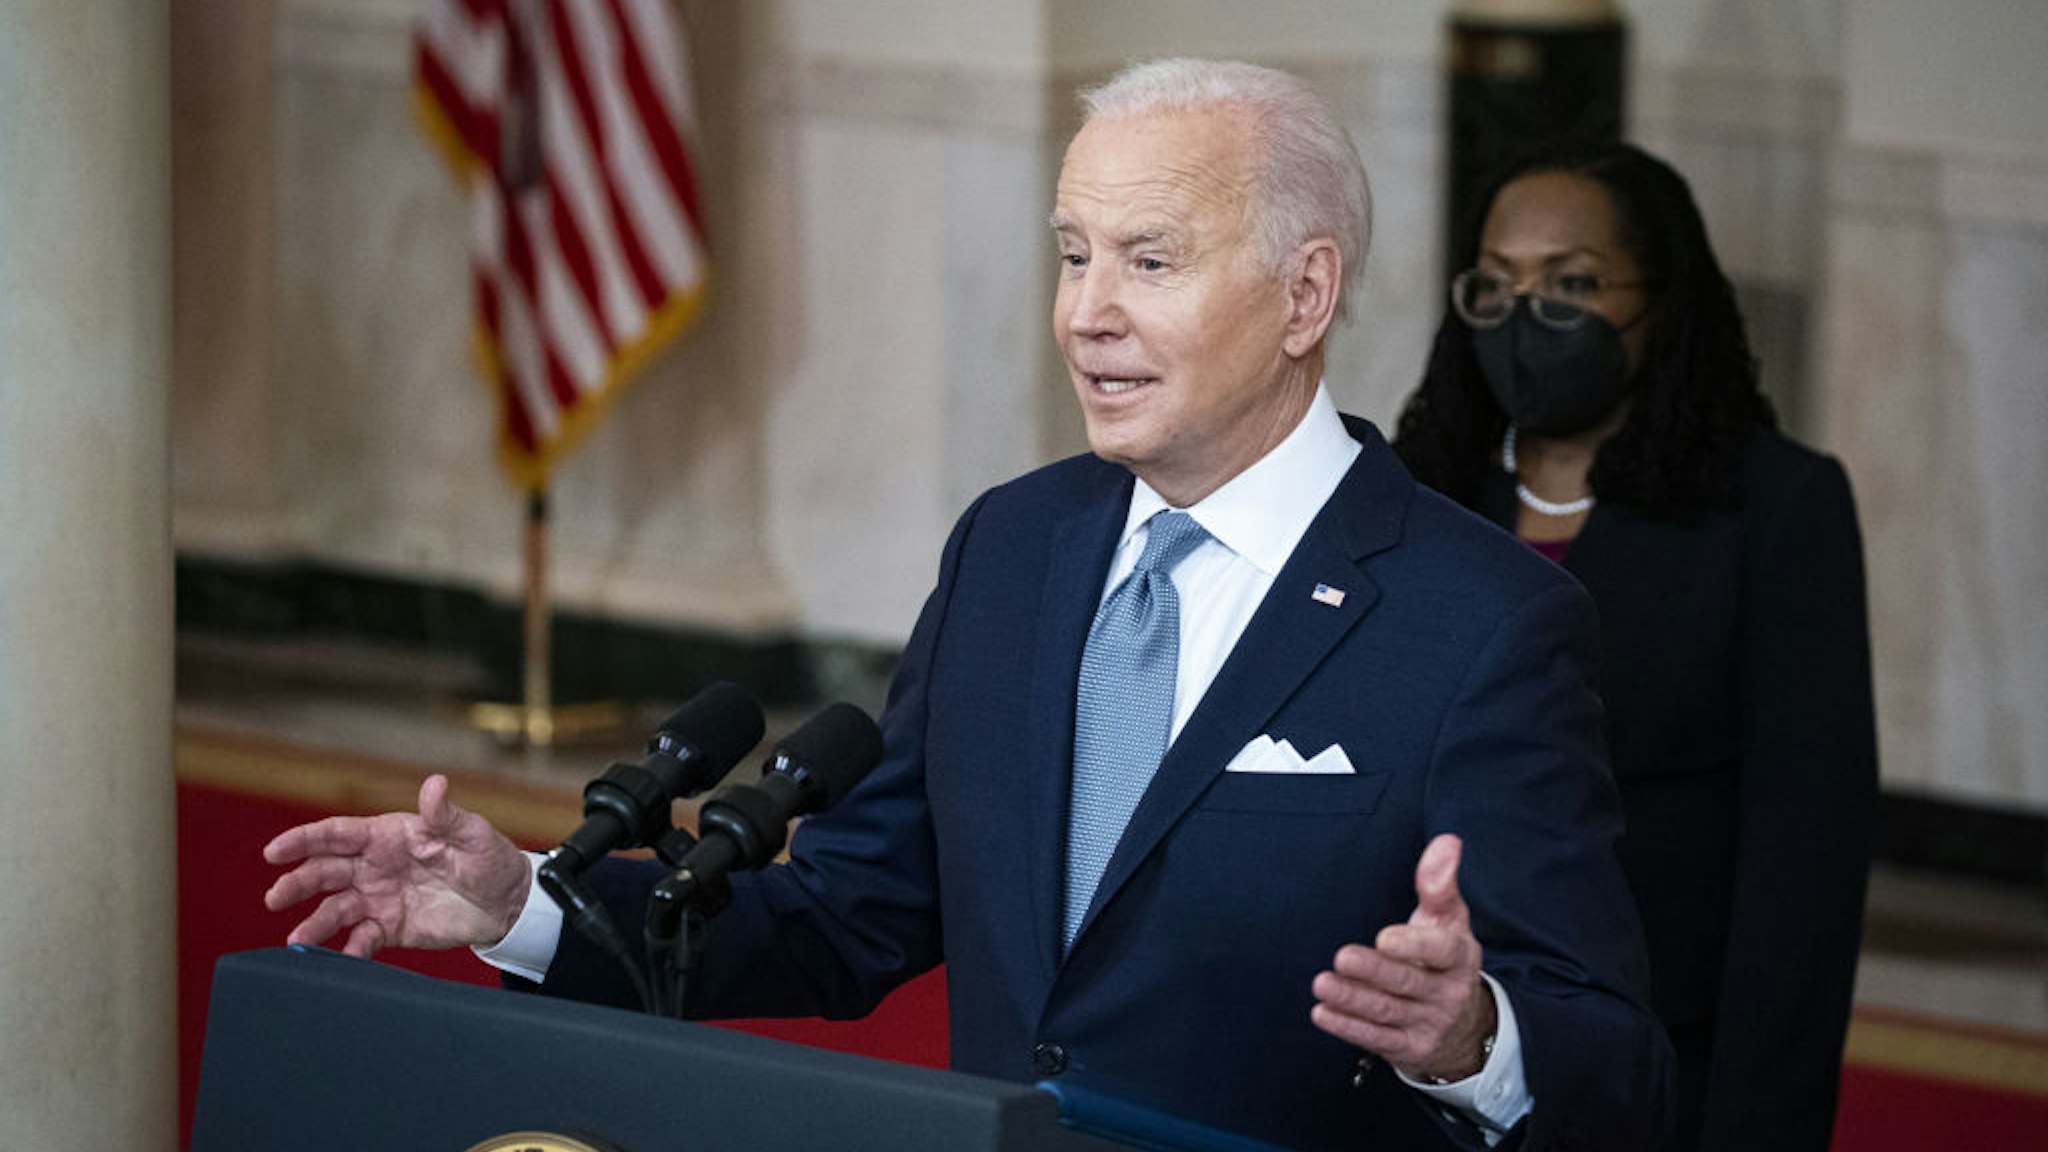 U.S. President Joe Biden speaks while announcing the nomination of Ketanji Brown Jackson, nominee for associate justice of the U.S. Supreme Court, right, during a ceremony at the White House in Washington, D.C., U.S., on Friday, Feb. 25, 2022.